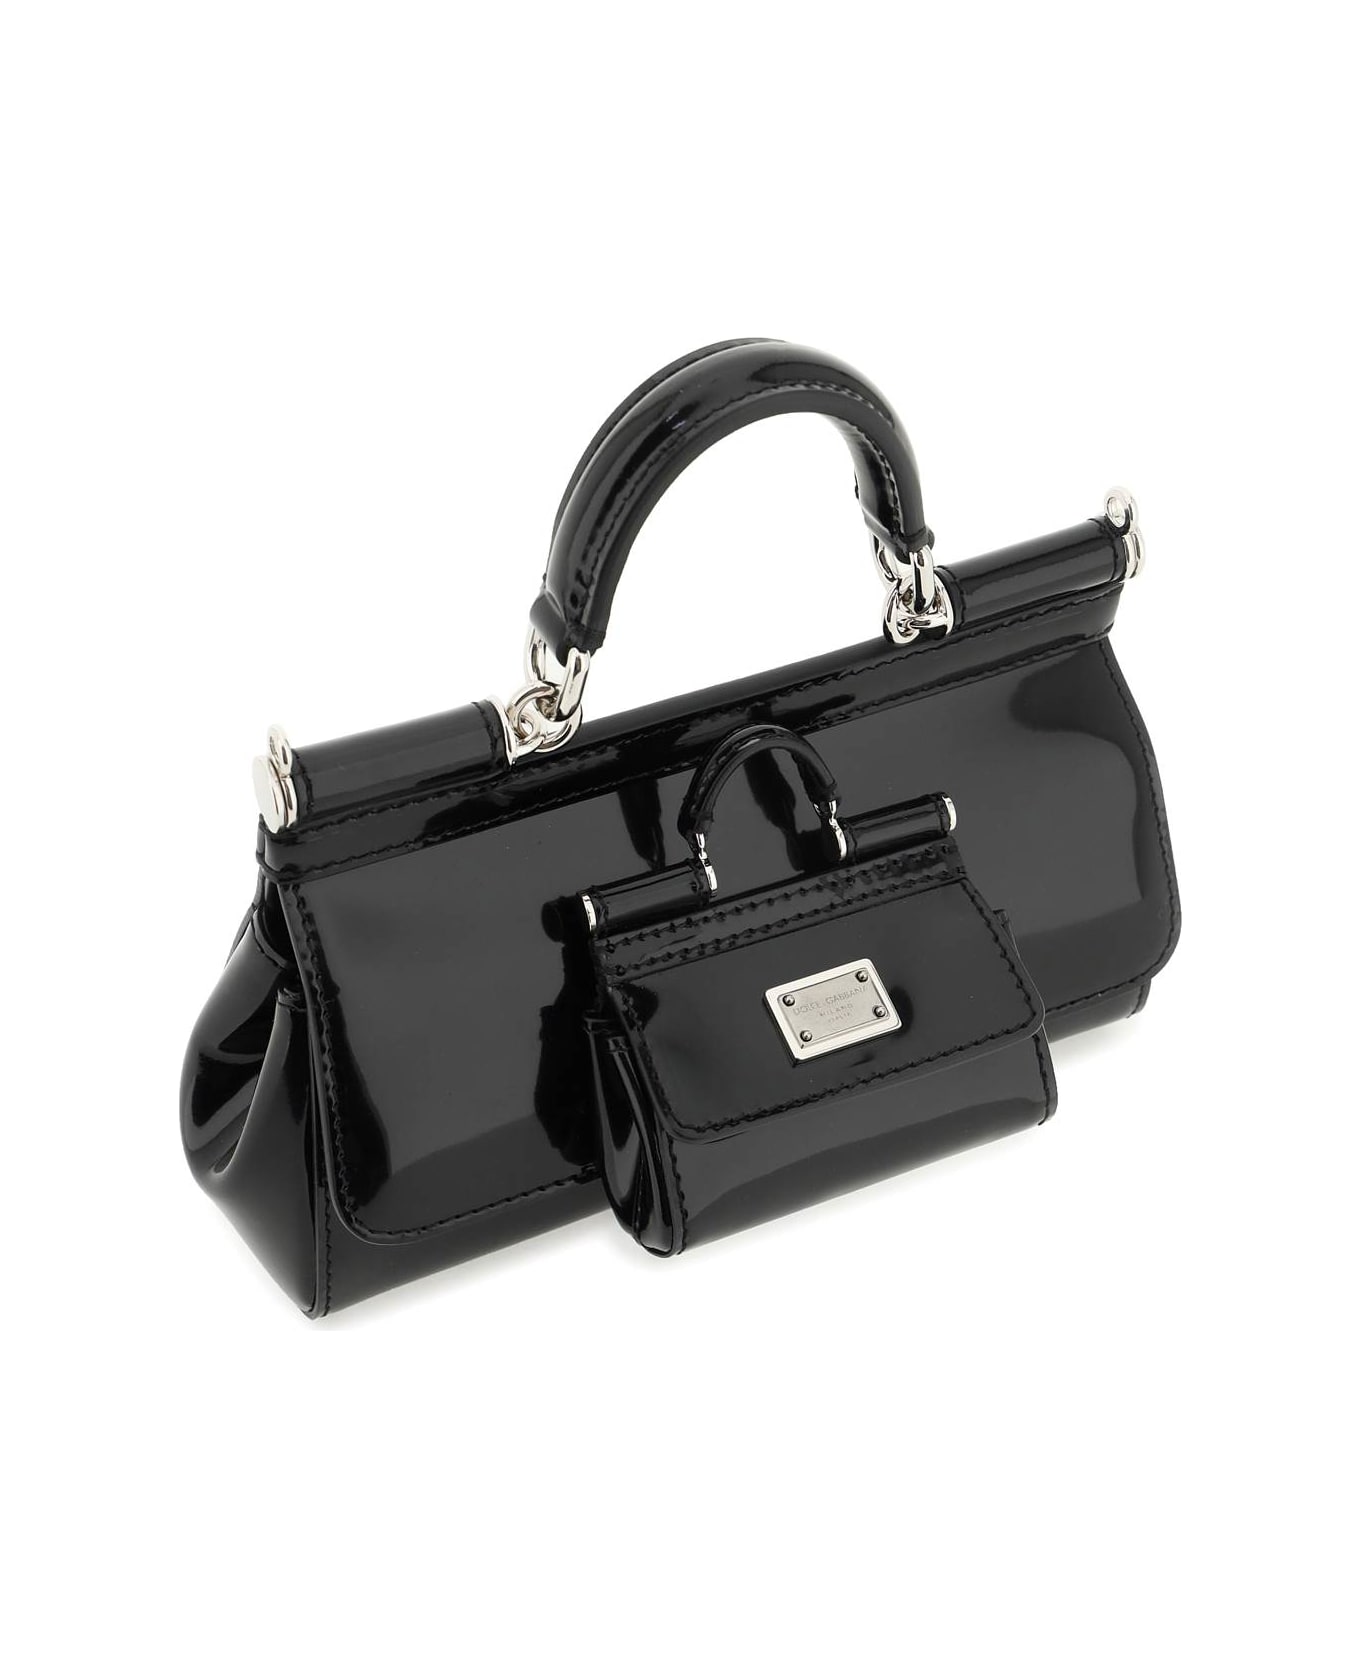 Dolce & Gabbana Patent Leather Small 'sicily' Bag With Coin Purse - Black